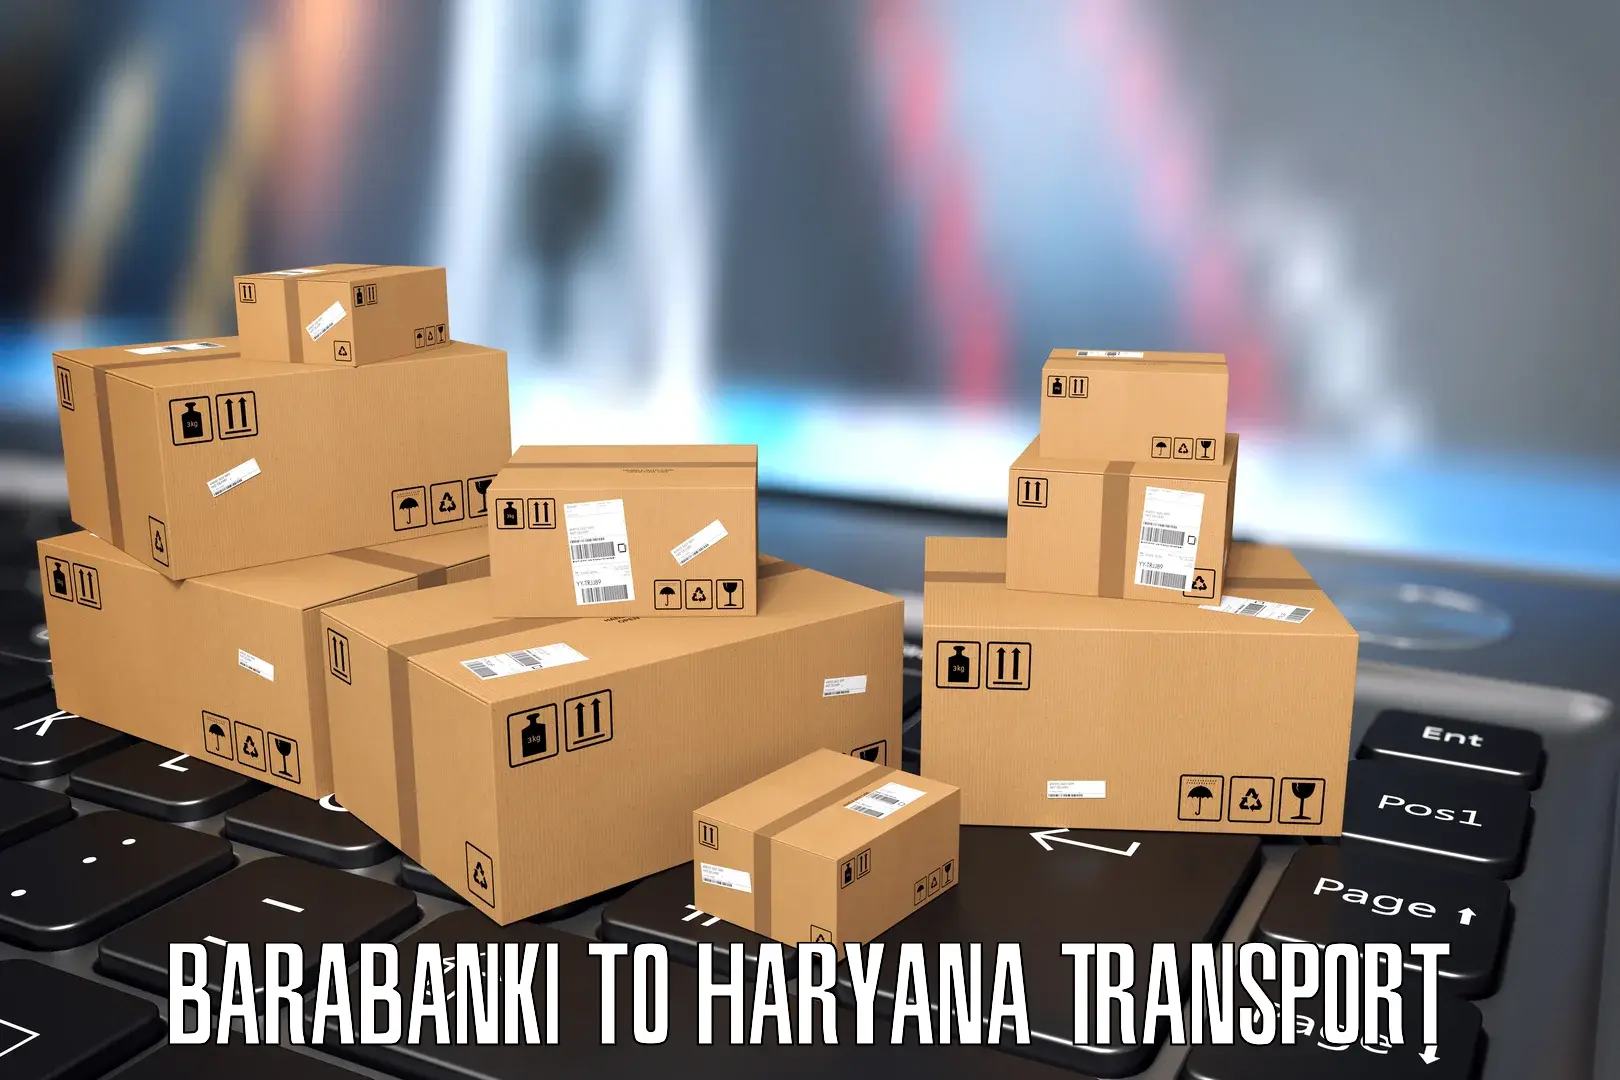 Transport bike from one state to another Barabanki to Bilaspur Haryana